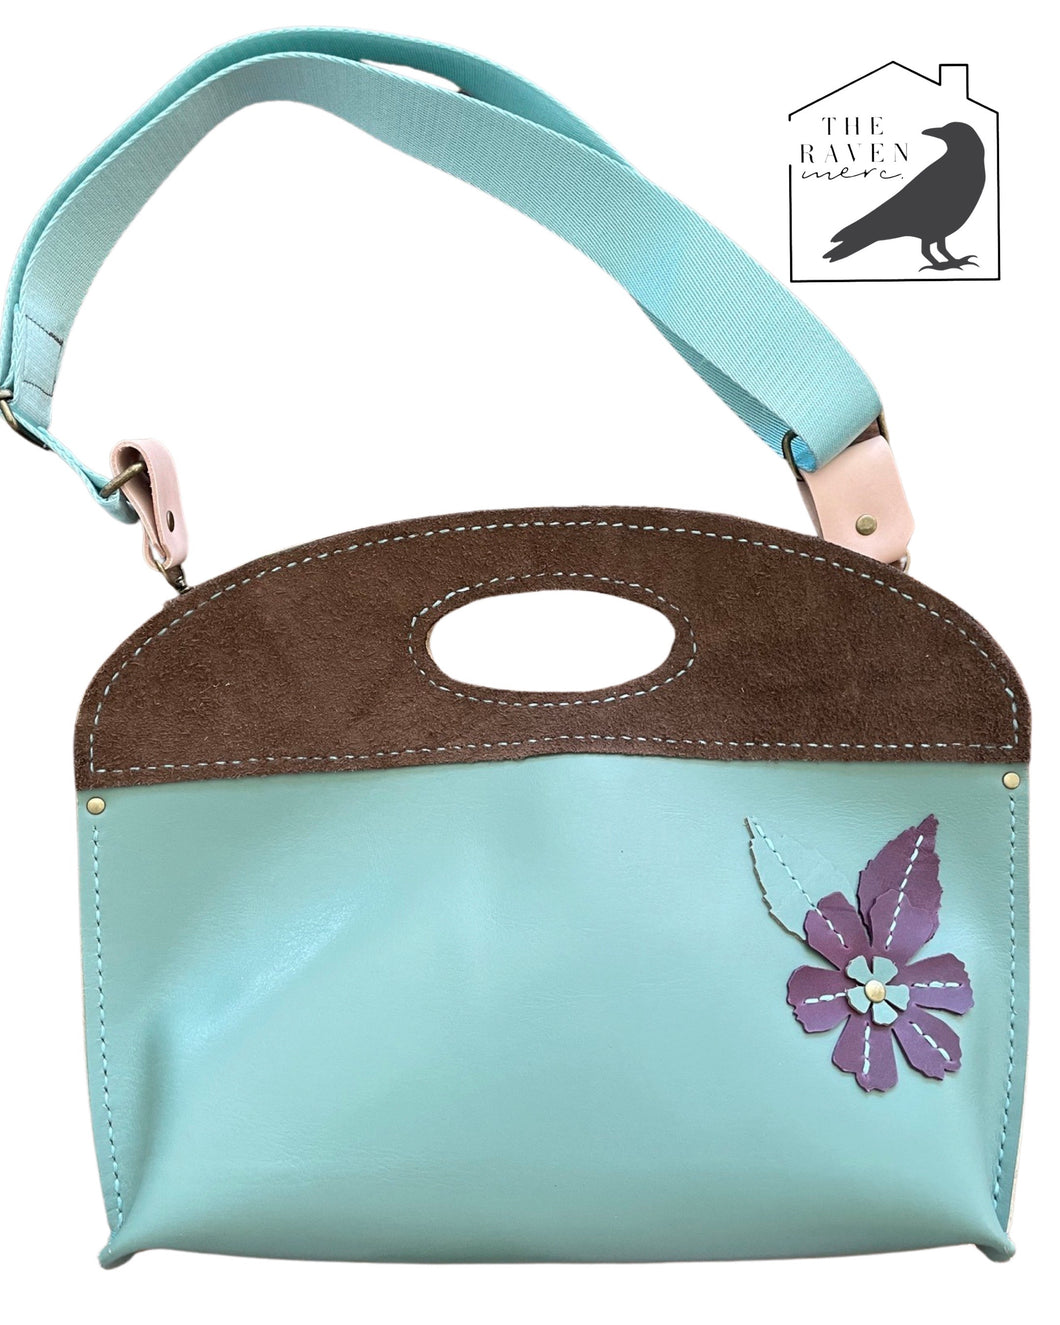 Boujee Boho - Mint Leather Clutch or Crossbody with Adjustable & Removable Strap